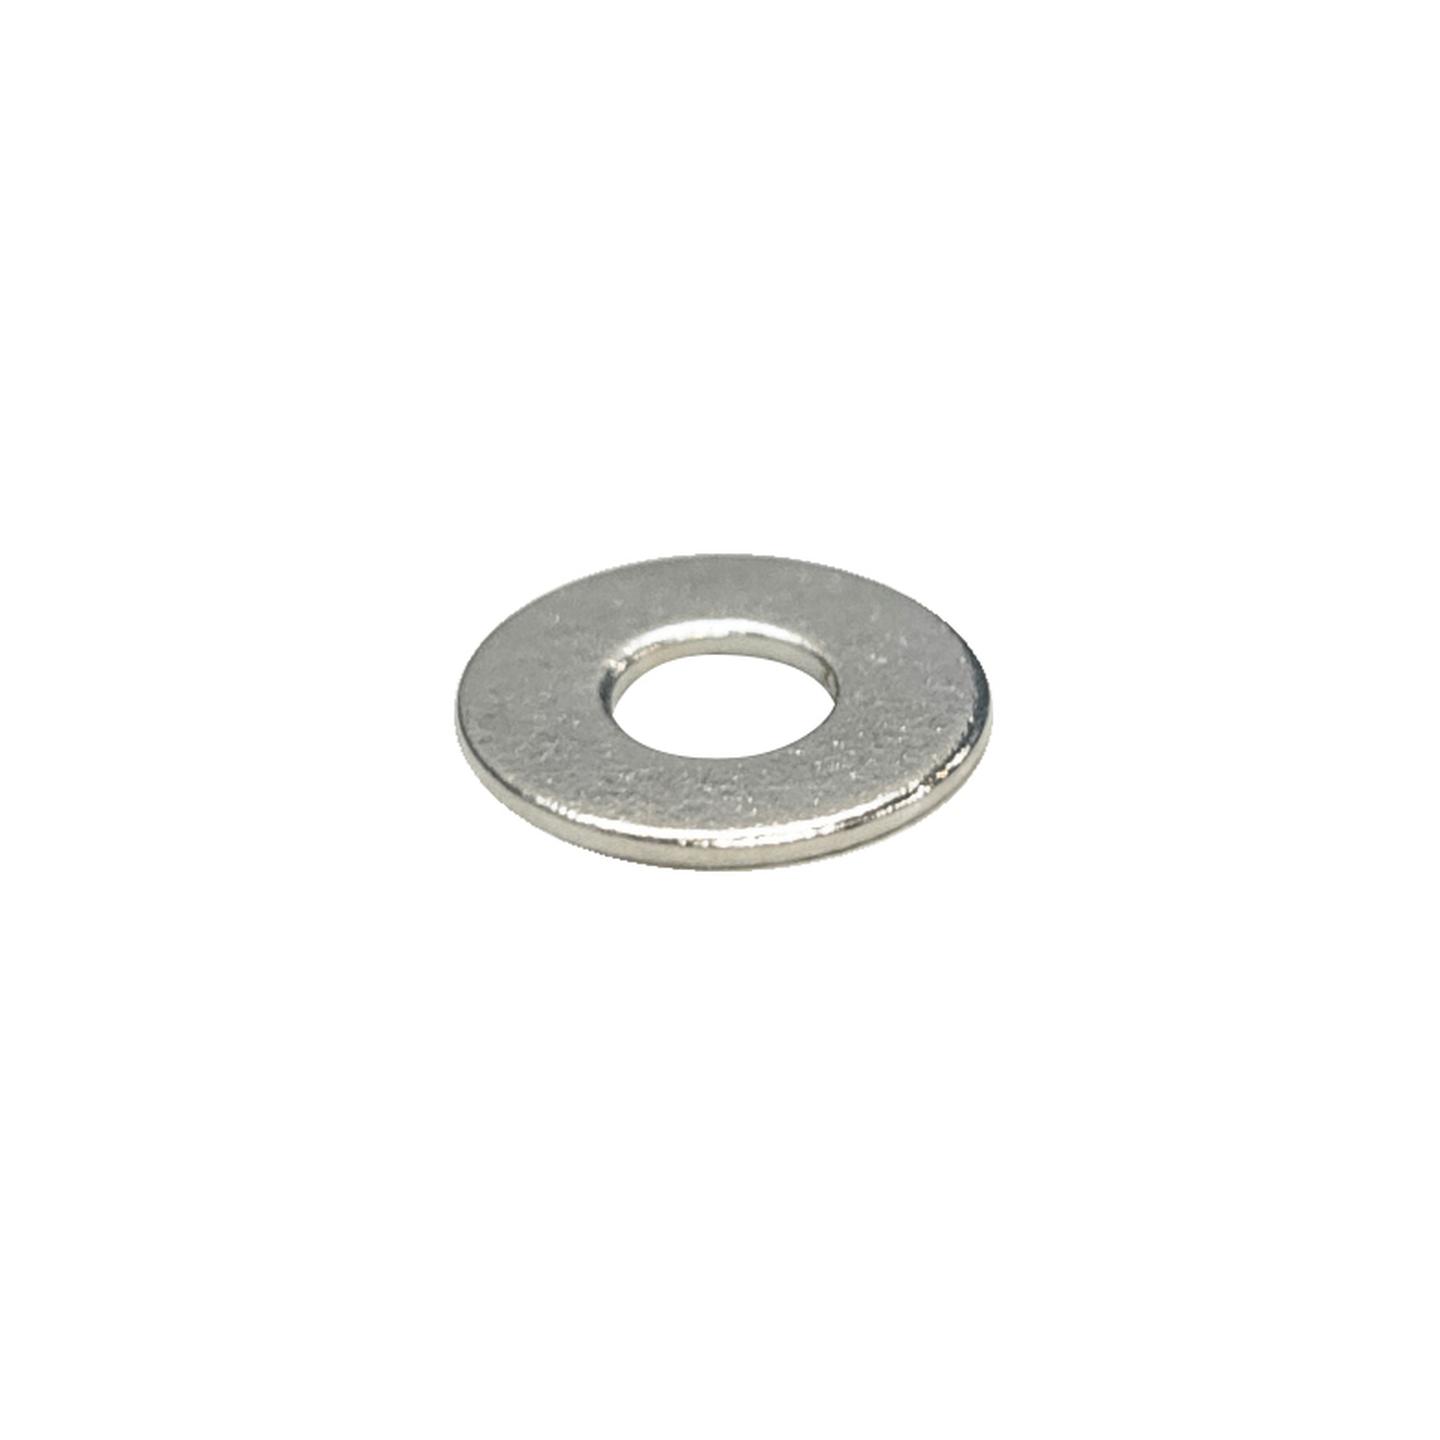 3mm Steel Flat Washers - Pack of 200